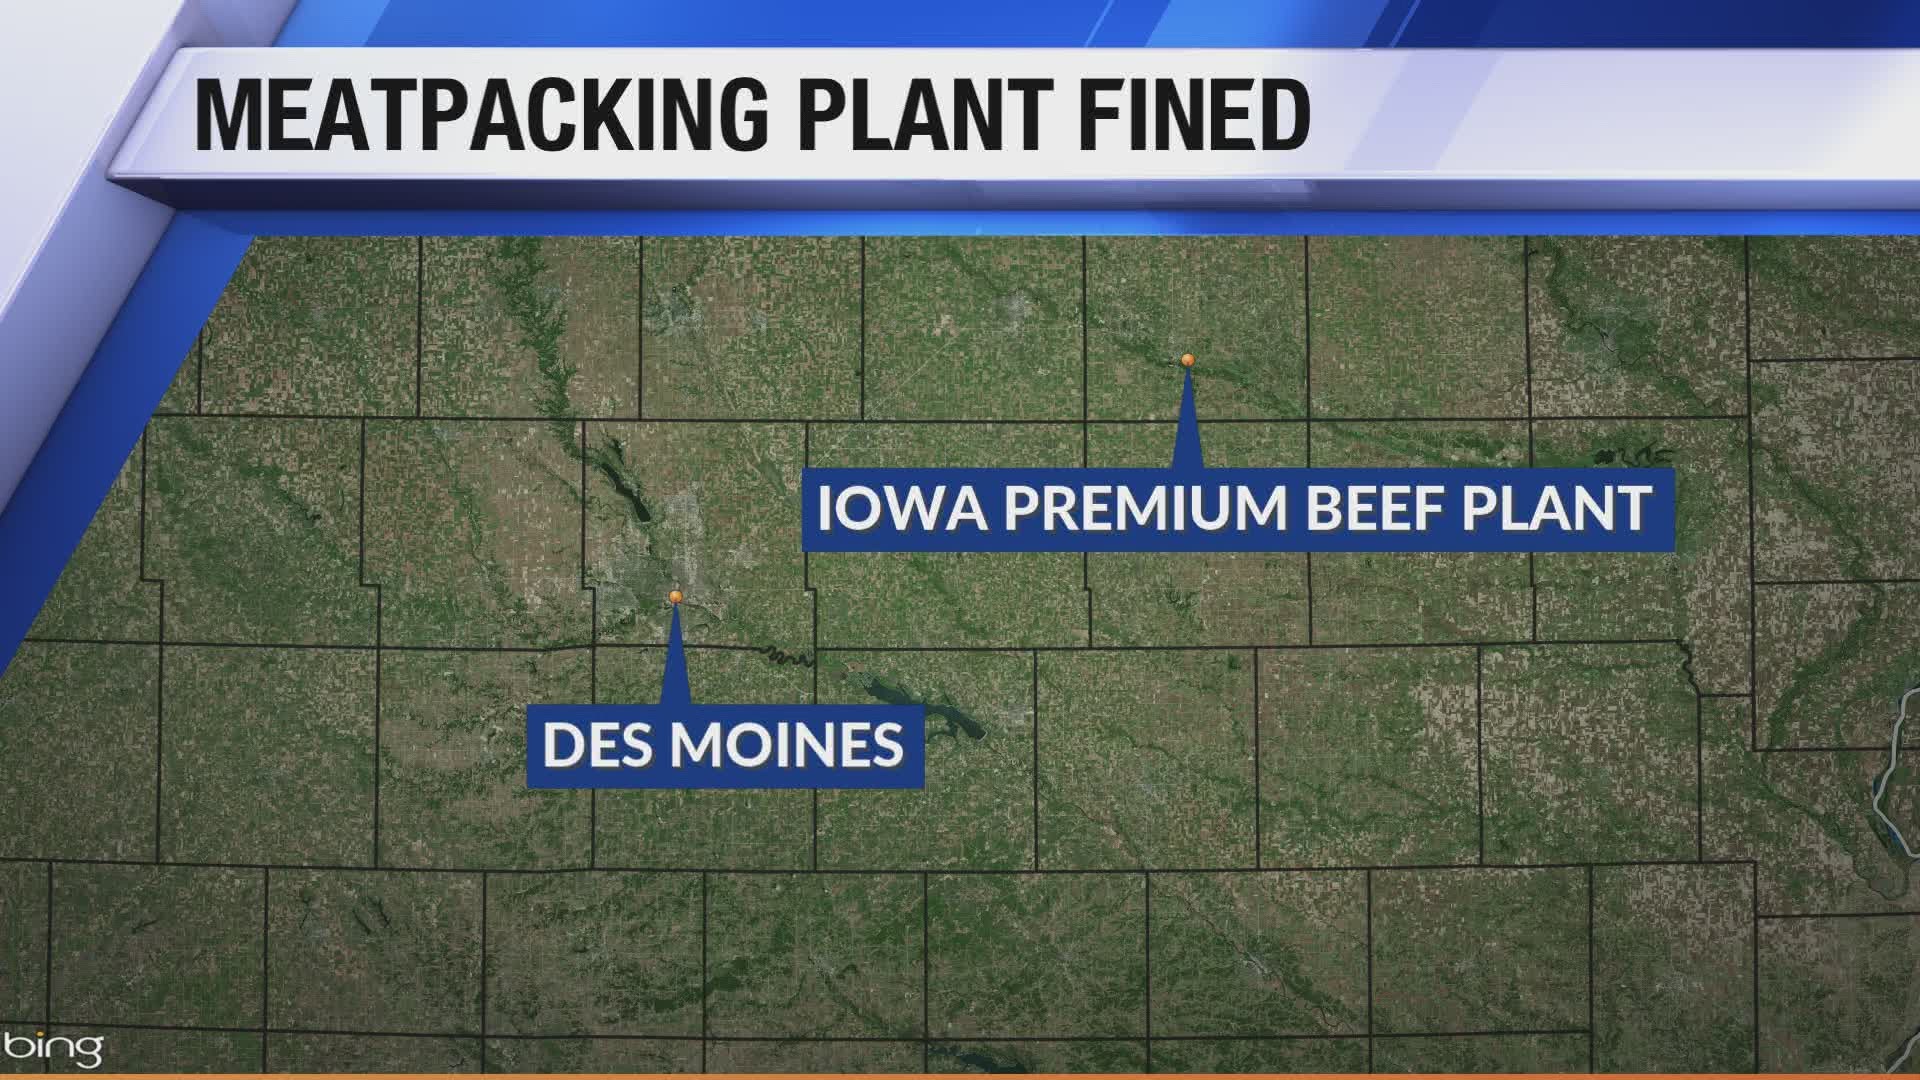 Iowa Premium Beef plant with COVID outbreak fined $957